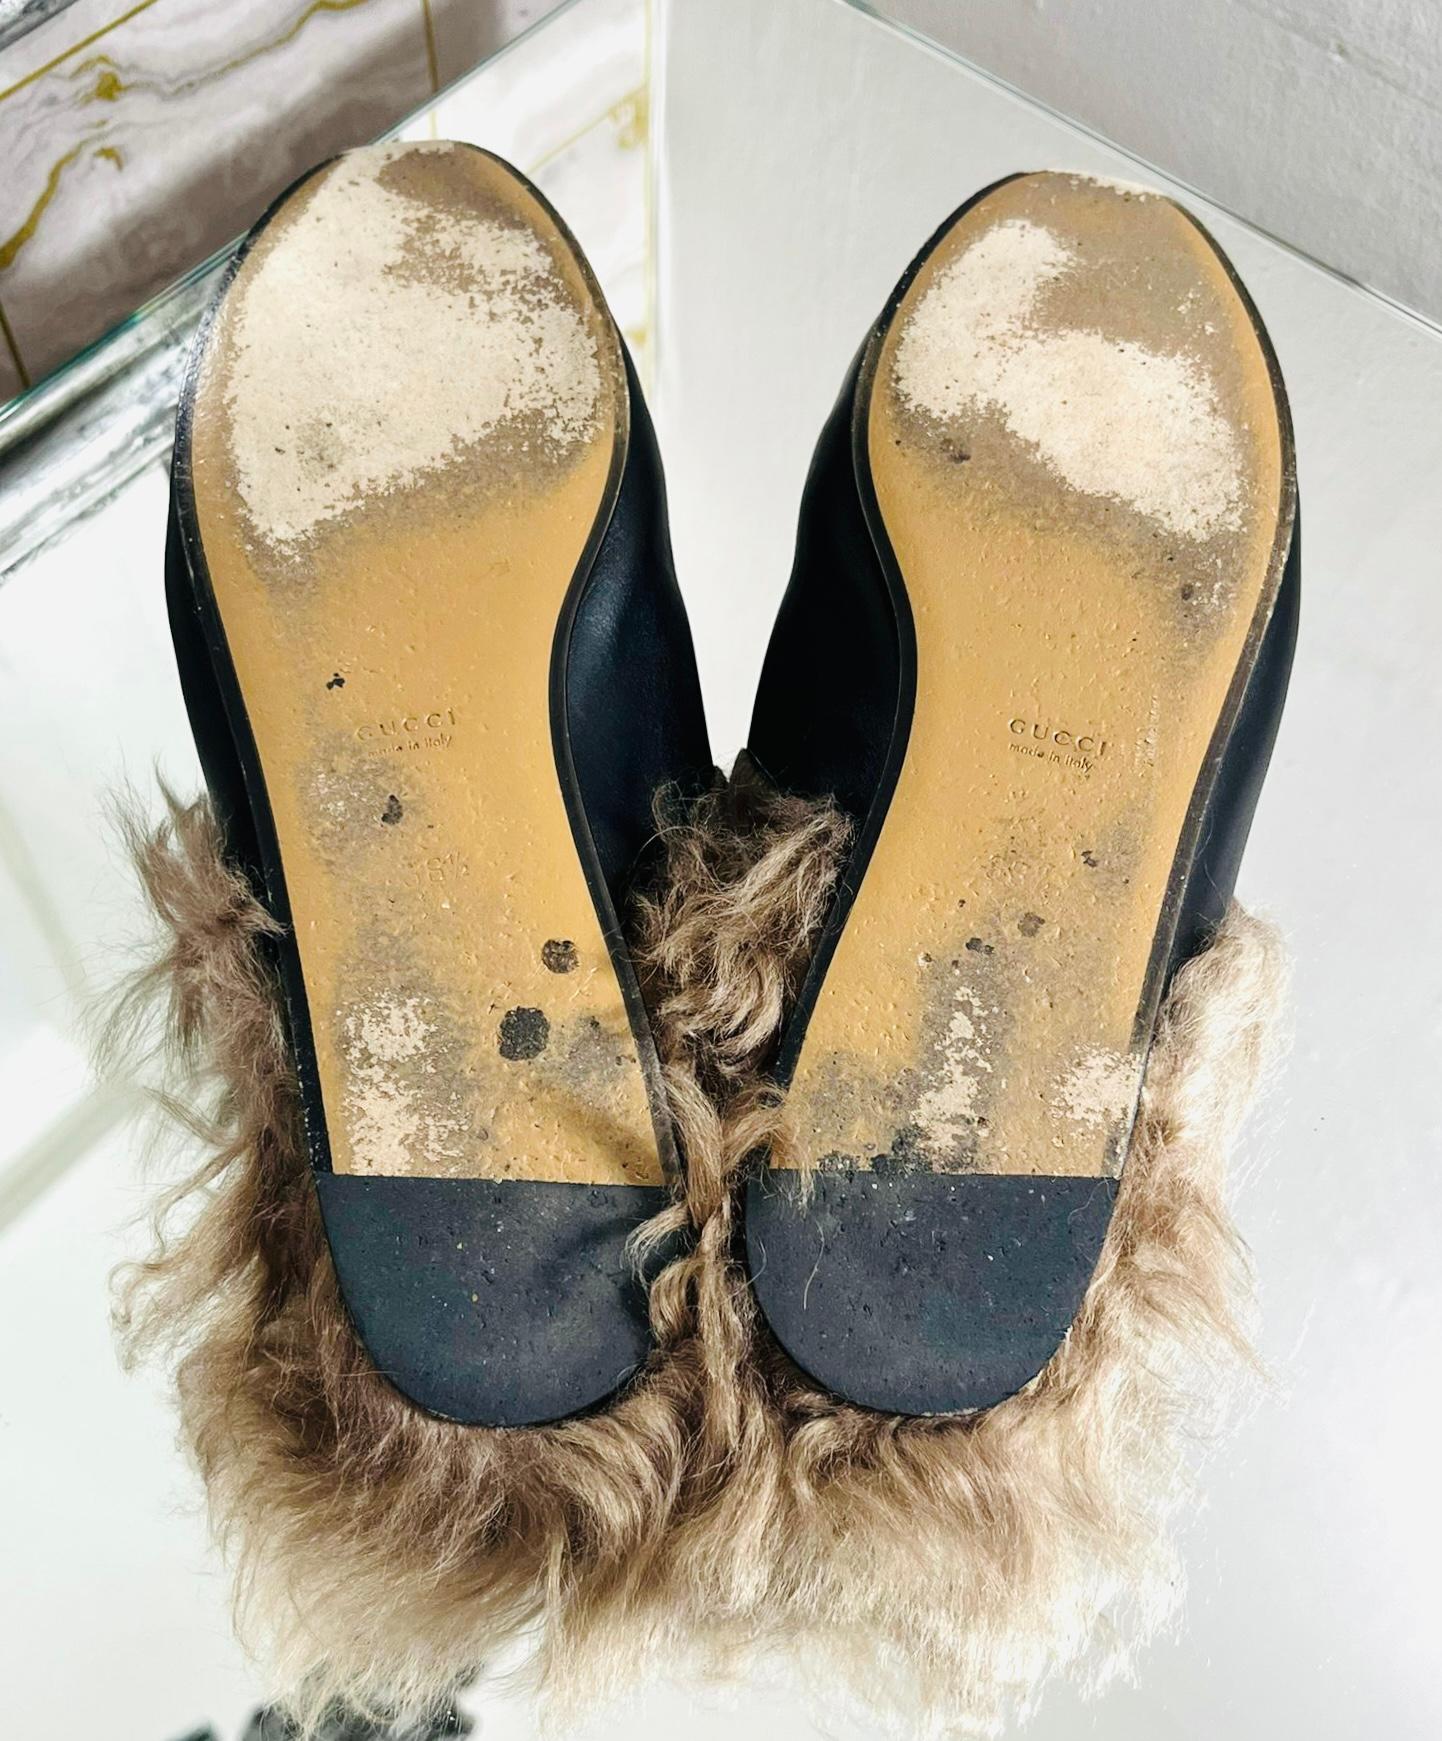 Gucci Princetown Leather Shearling-Lined Mules 2